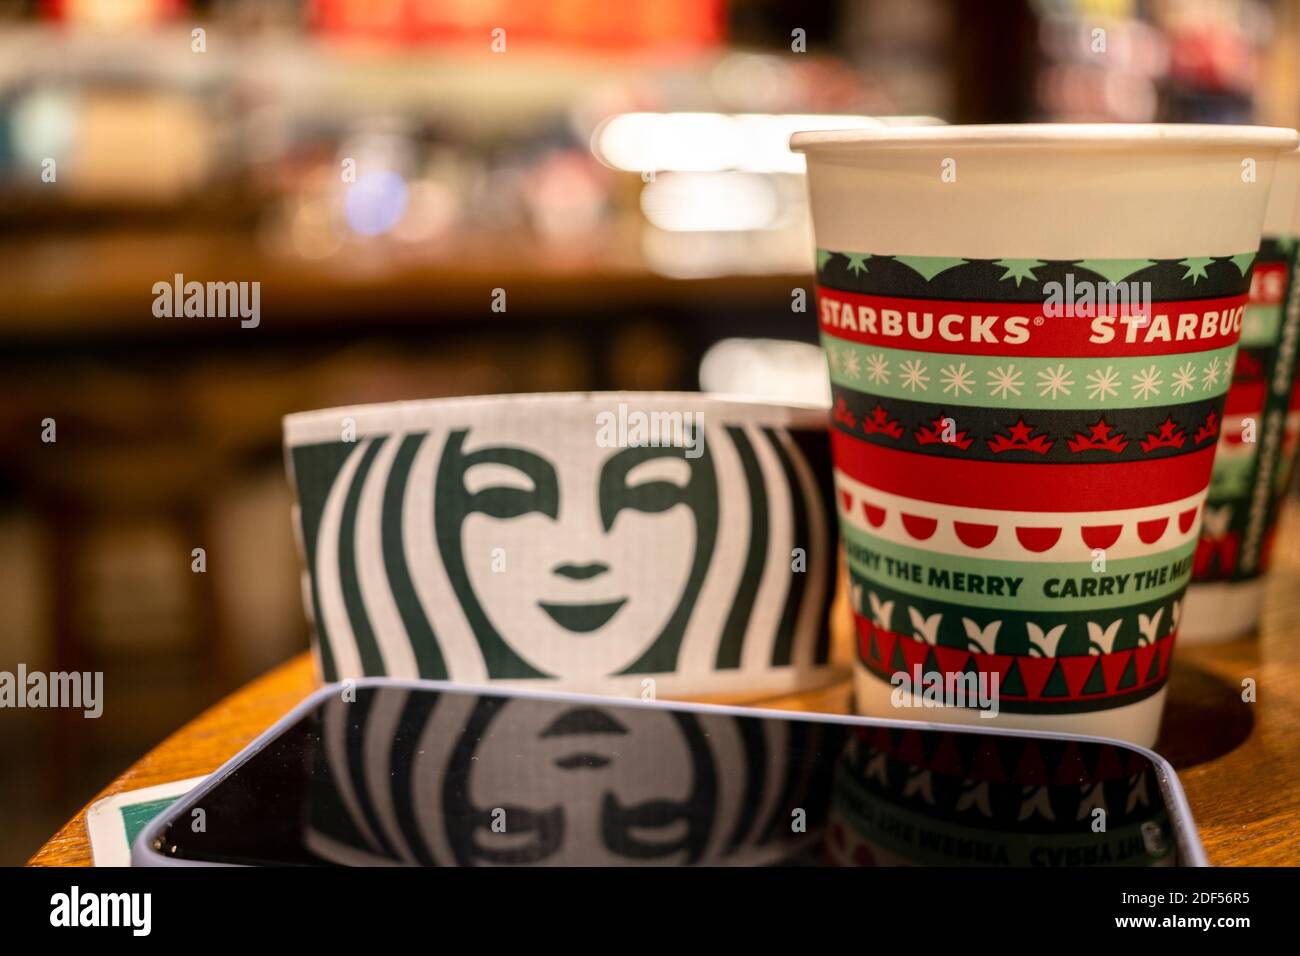 After last year's drama, Starbucks unveils holiday cups designed by 13 women